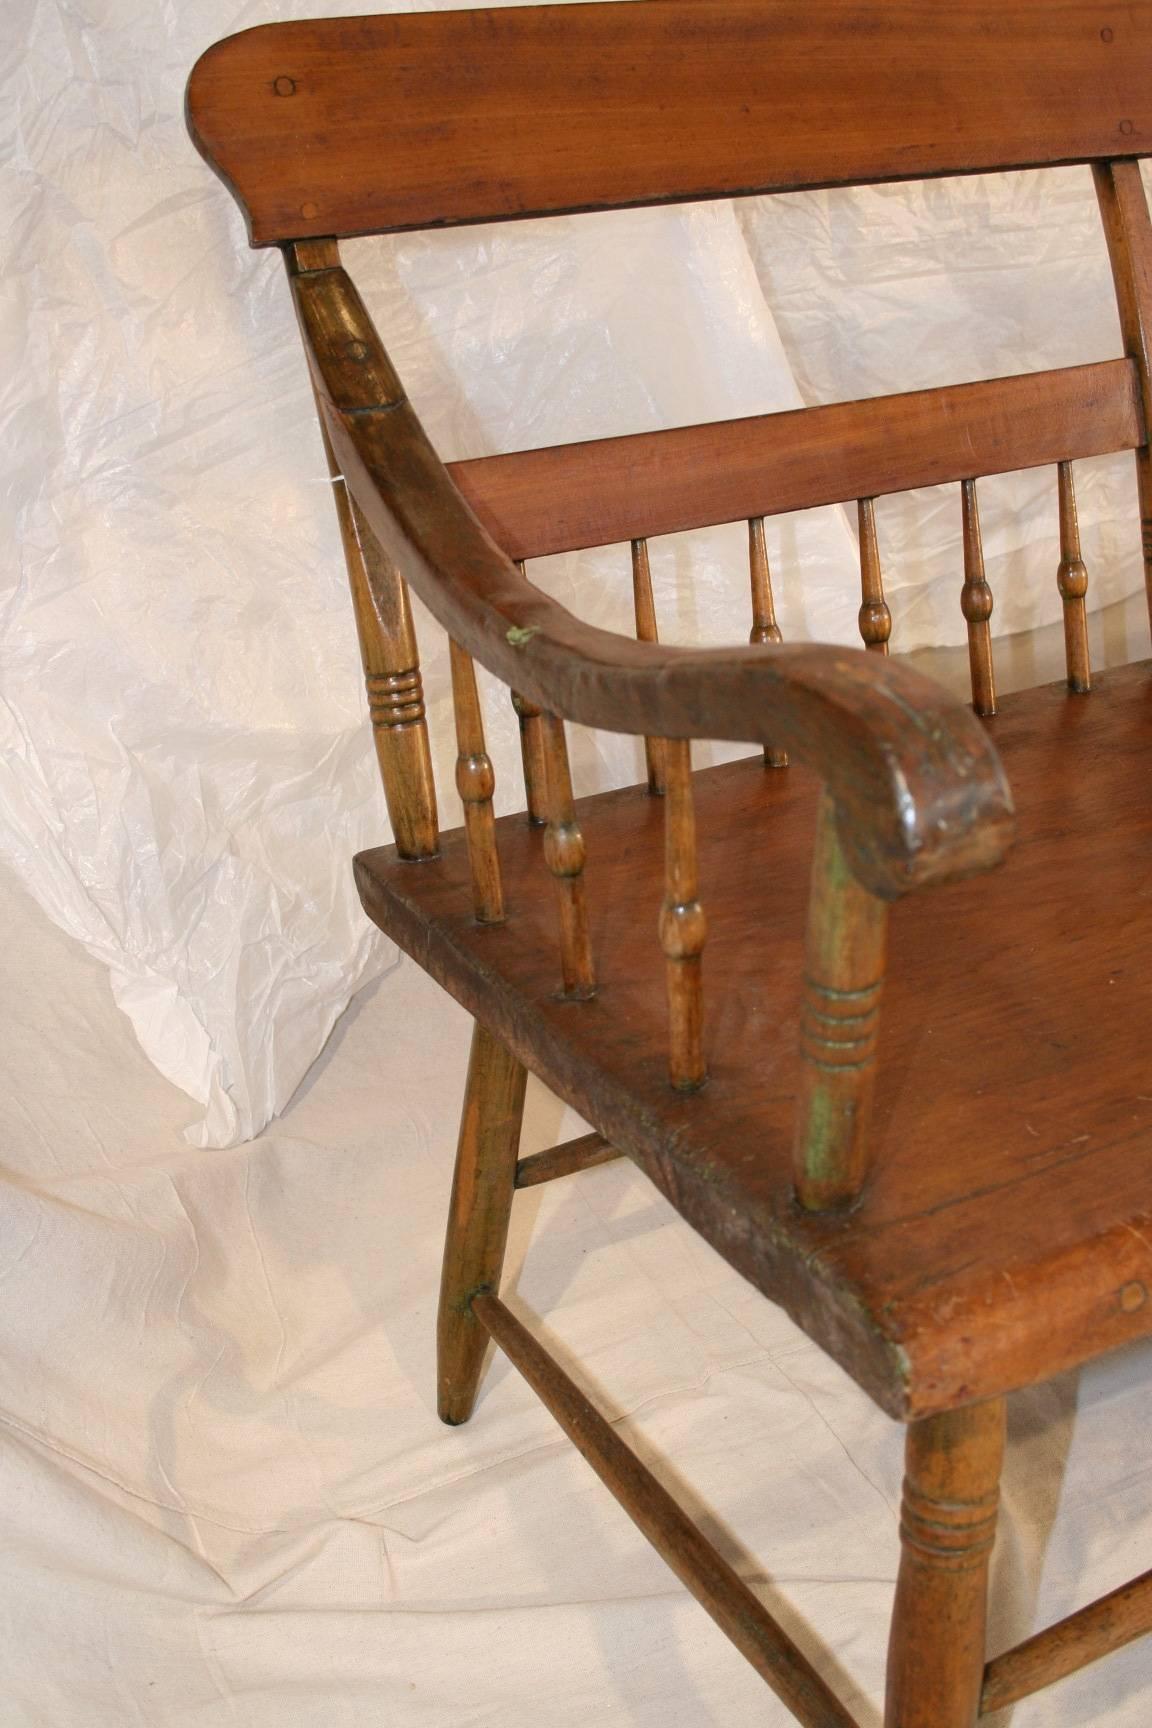 19th century spindle back New England Deacon's bench
Refinished has evidence of old paint patina and old repairs.